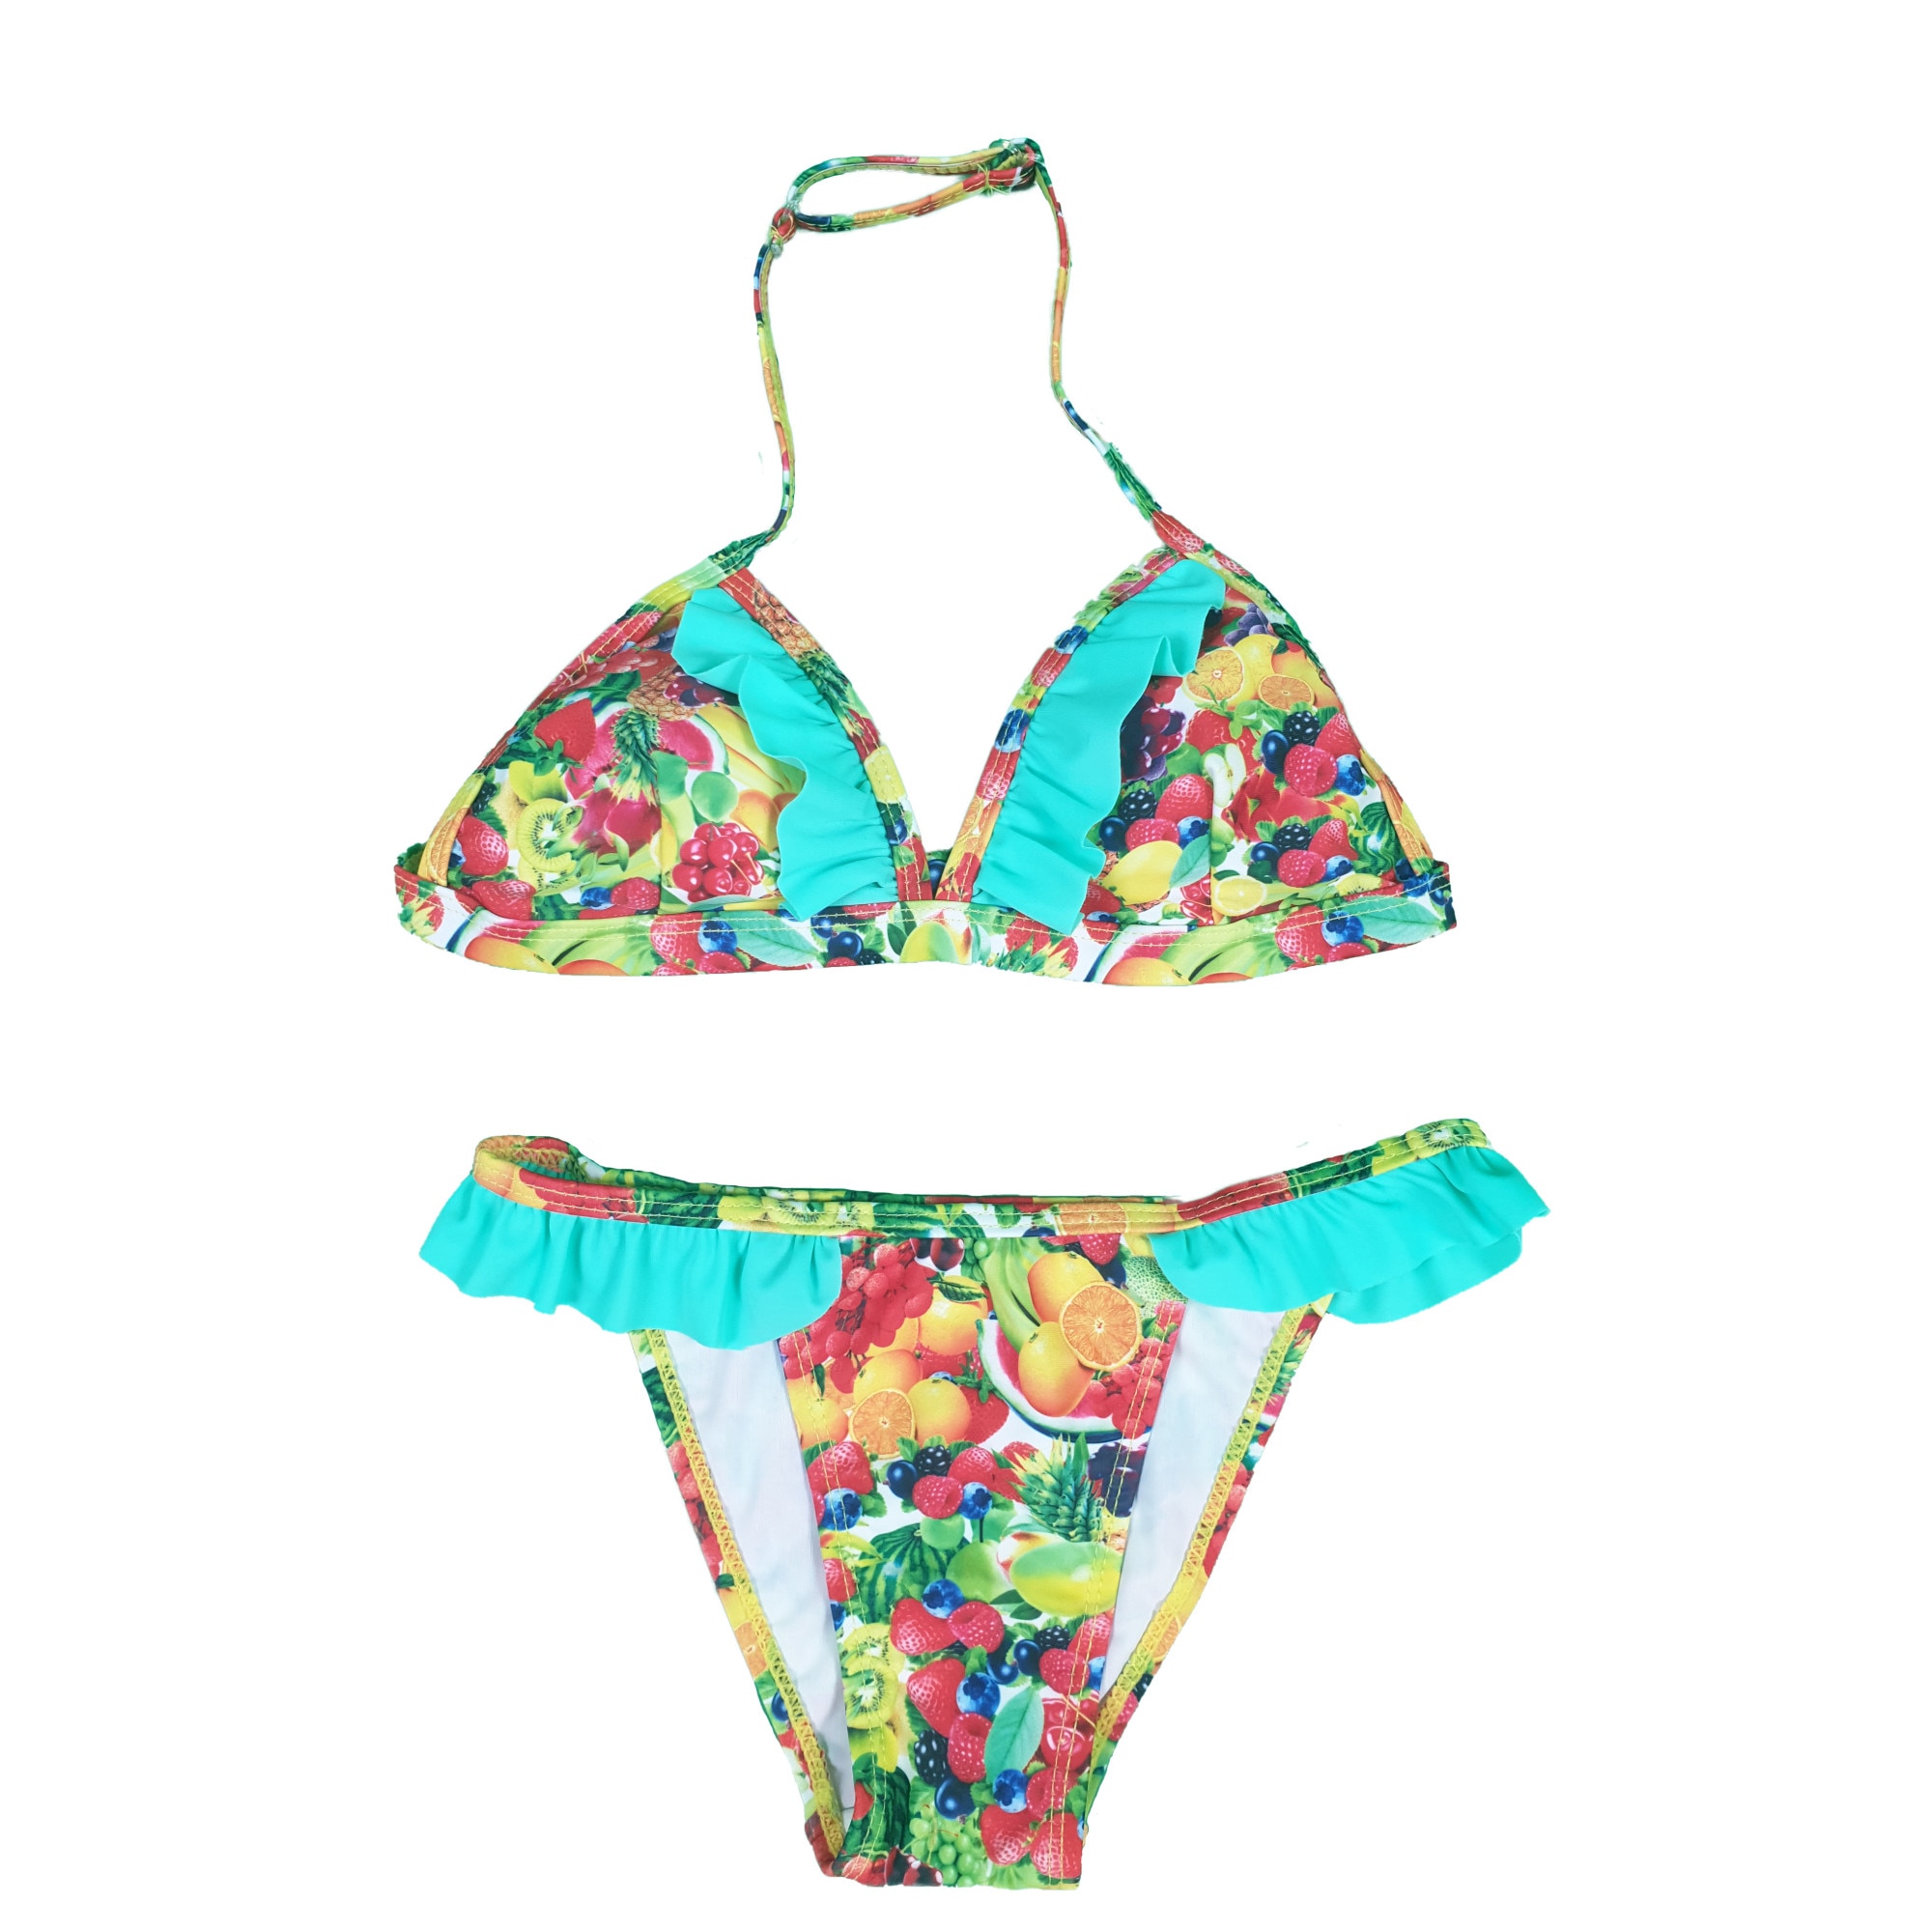 Chromatic Norm Adjustable Costum baie copii 2 piese Cocktail 9-10 ani - eMAG.ro